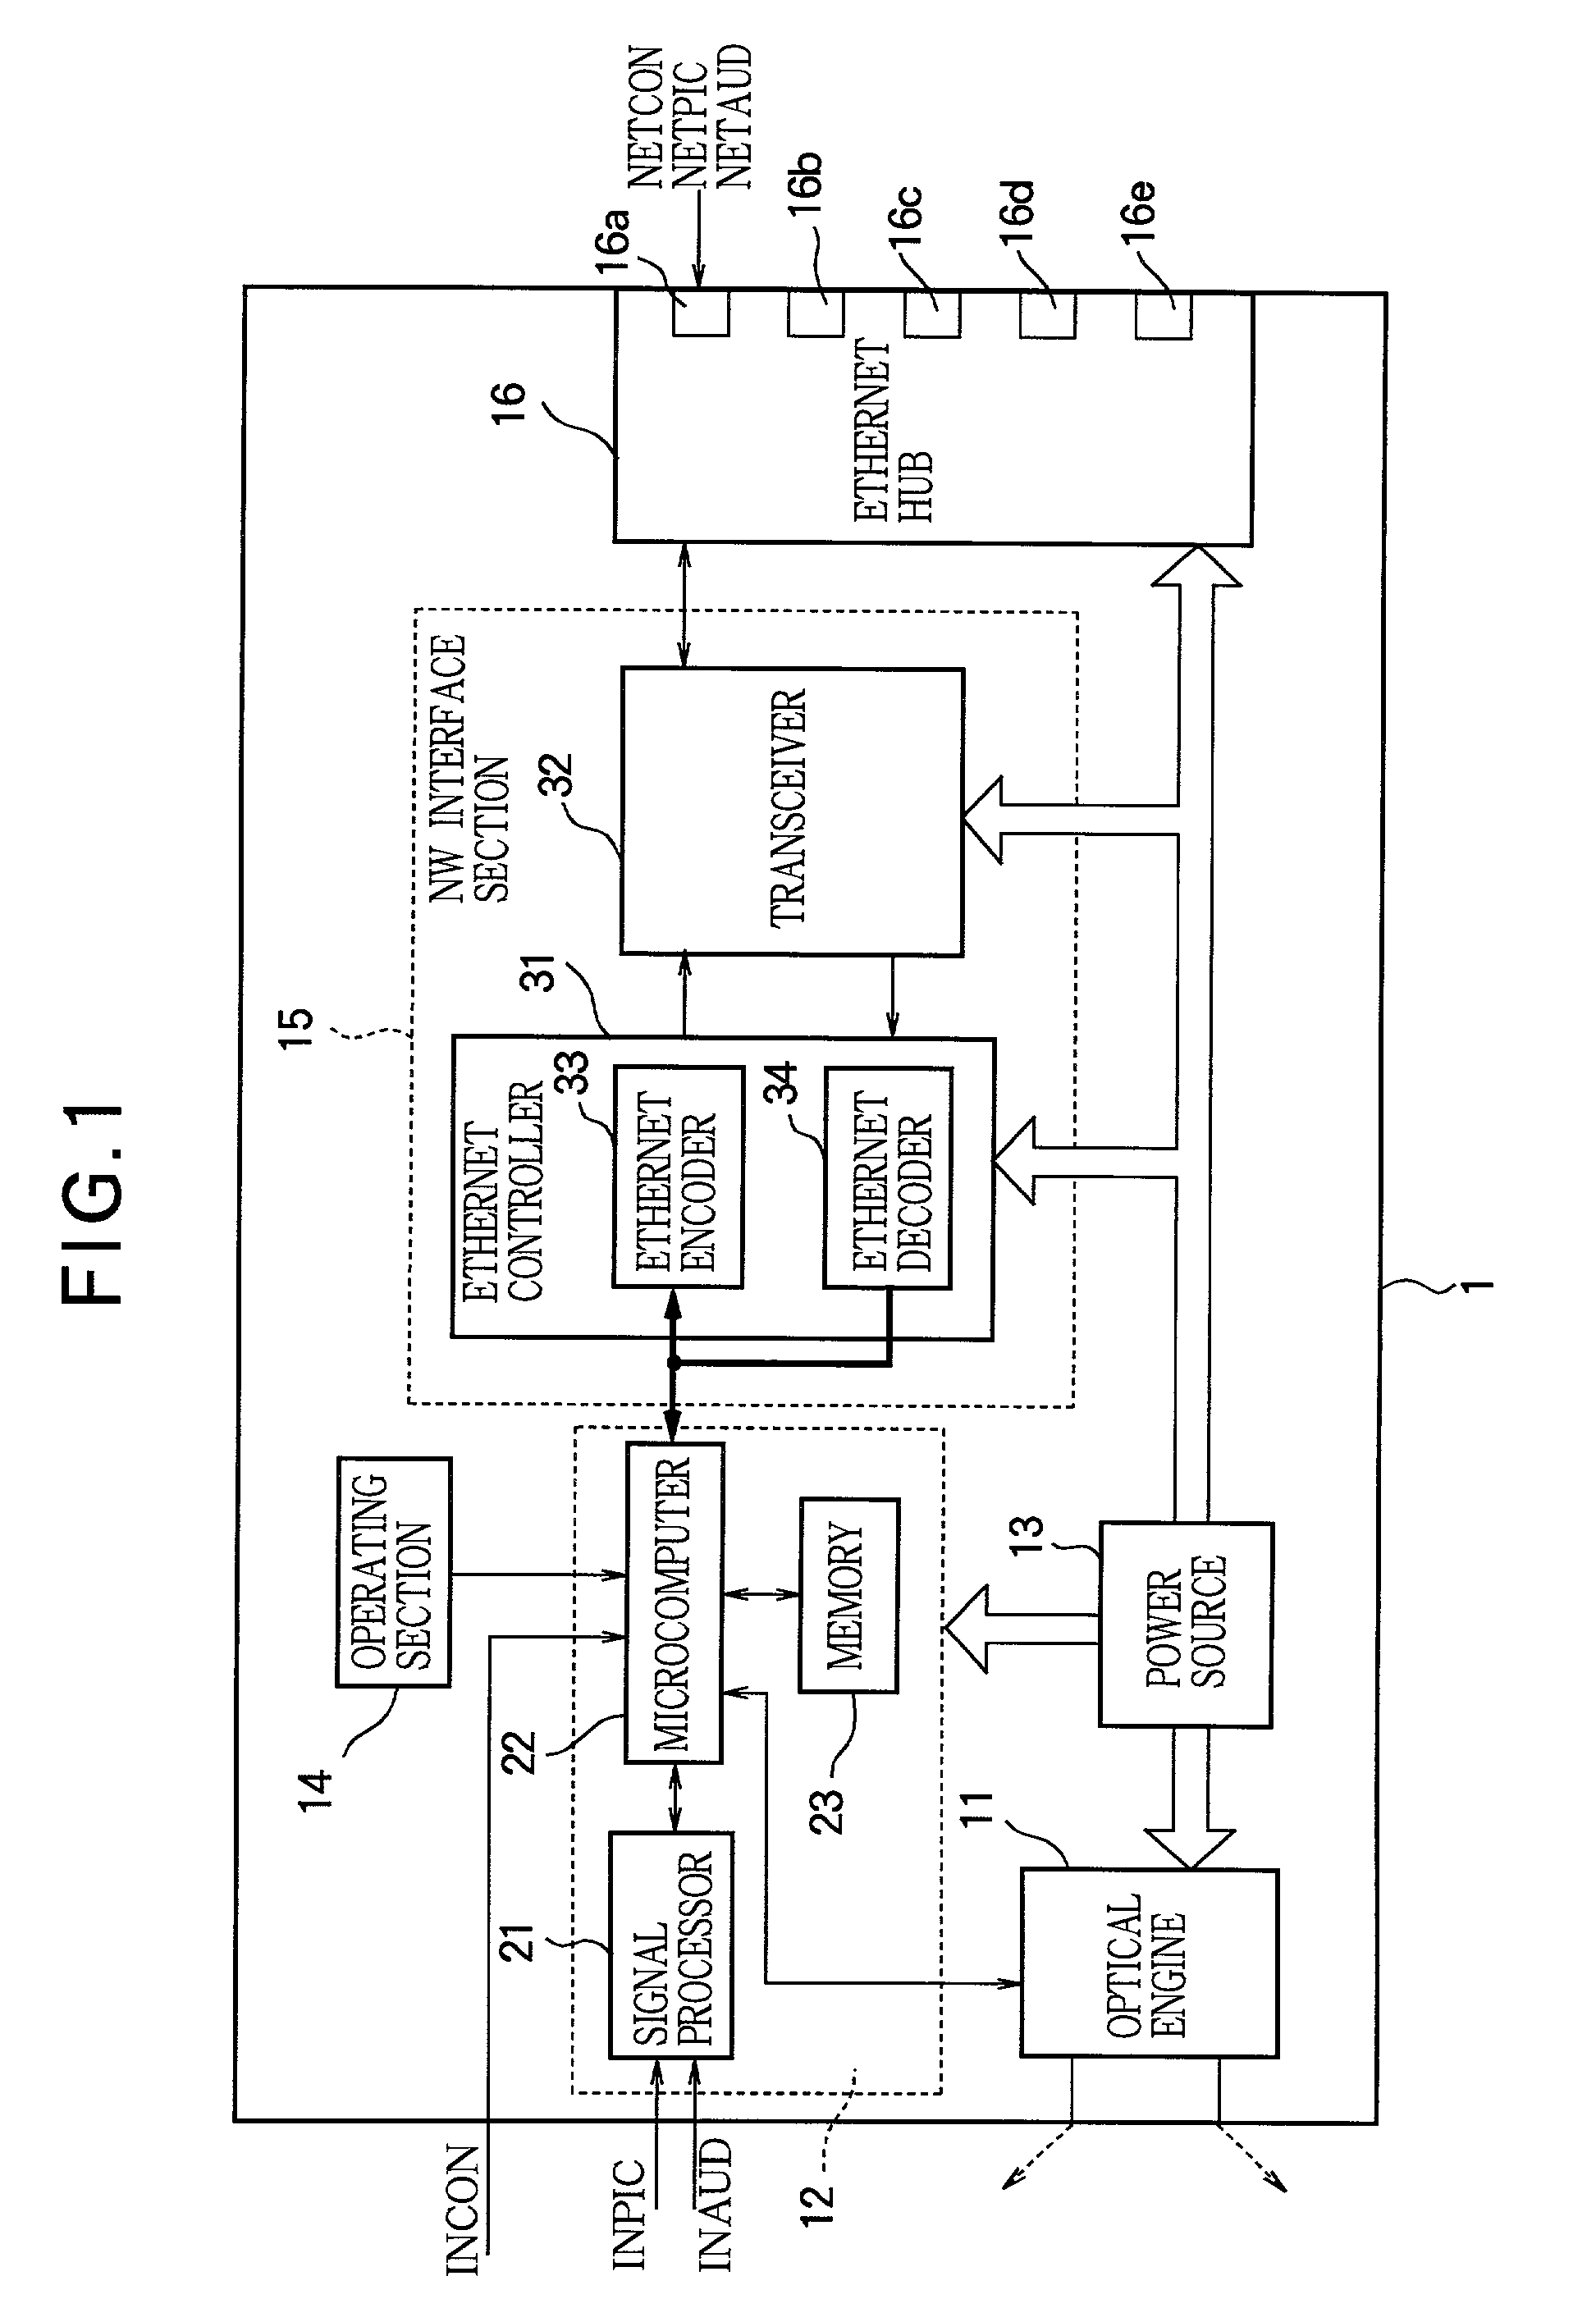 Projector, network system including projector, and method of controlling projector on network system